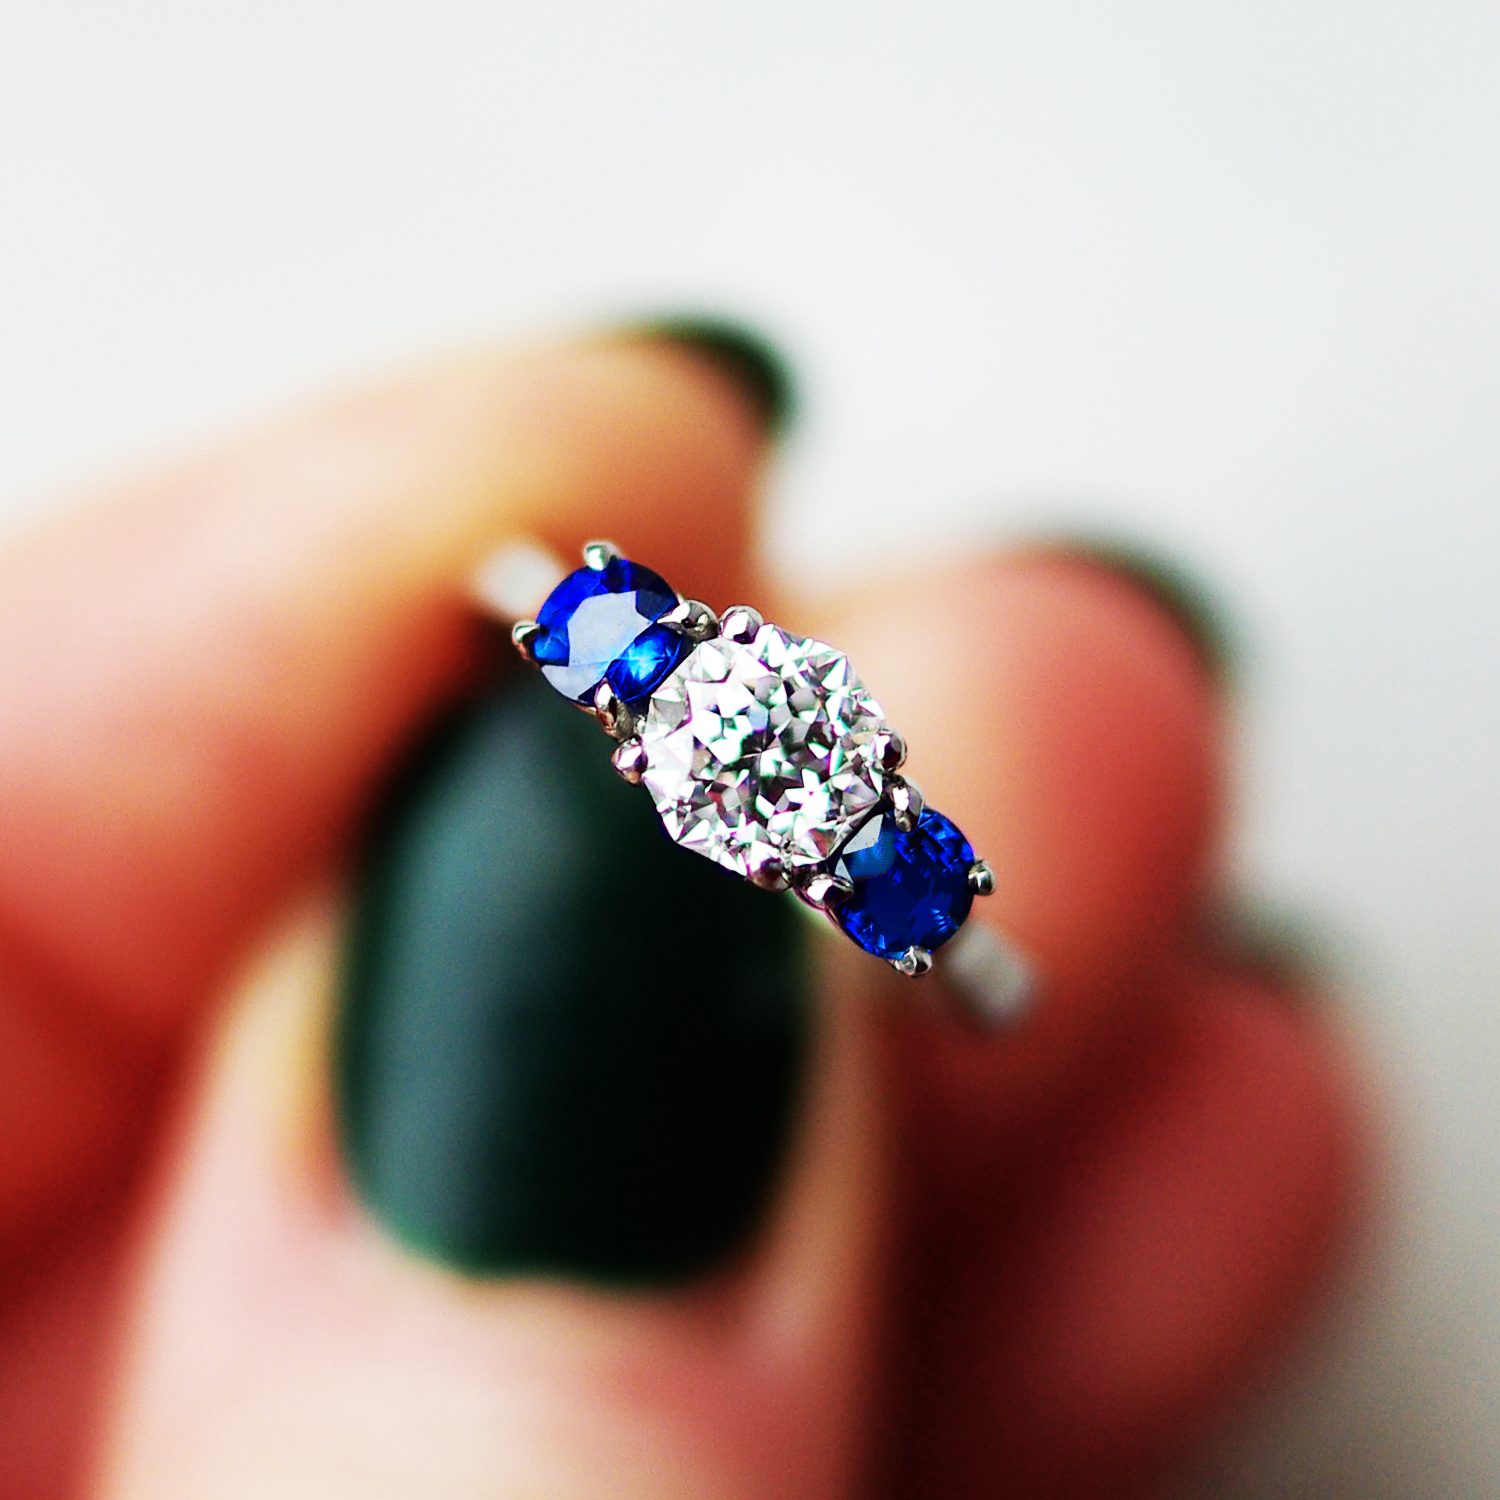 Trilogy Engagement Ring With Two Round Brilliant Cut Sapphires And a Meteor Cut Diamond